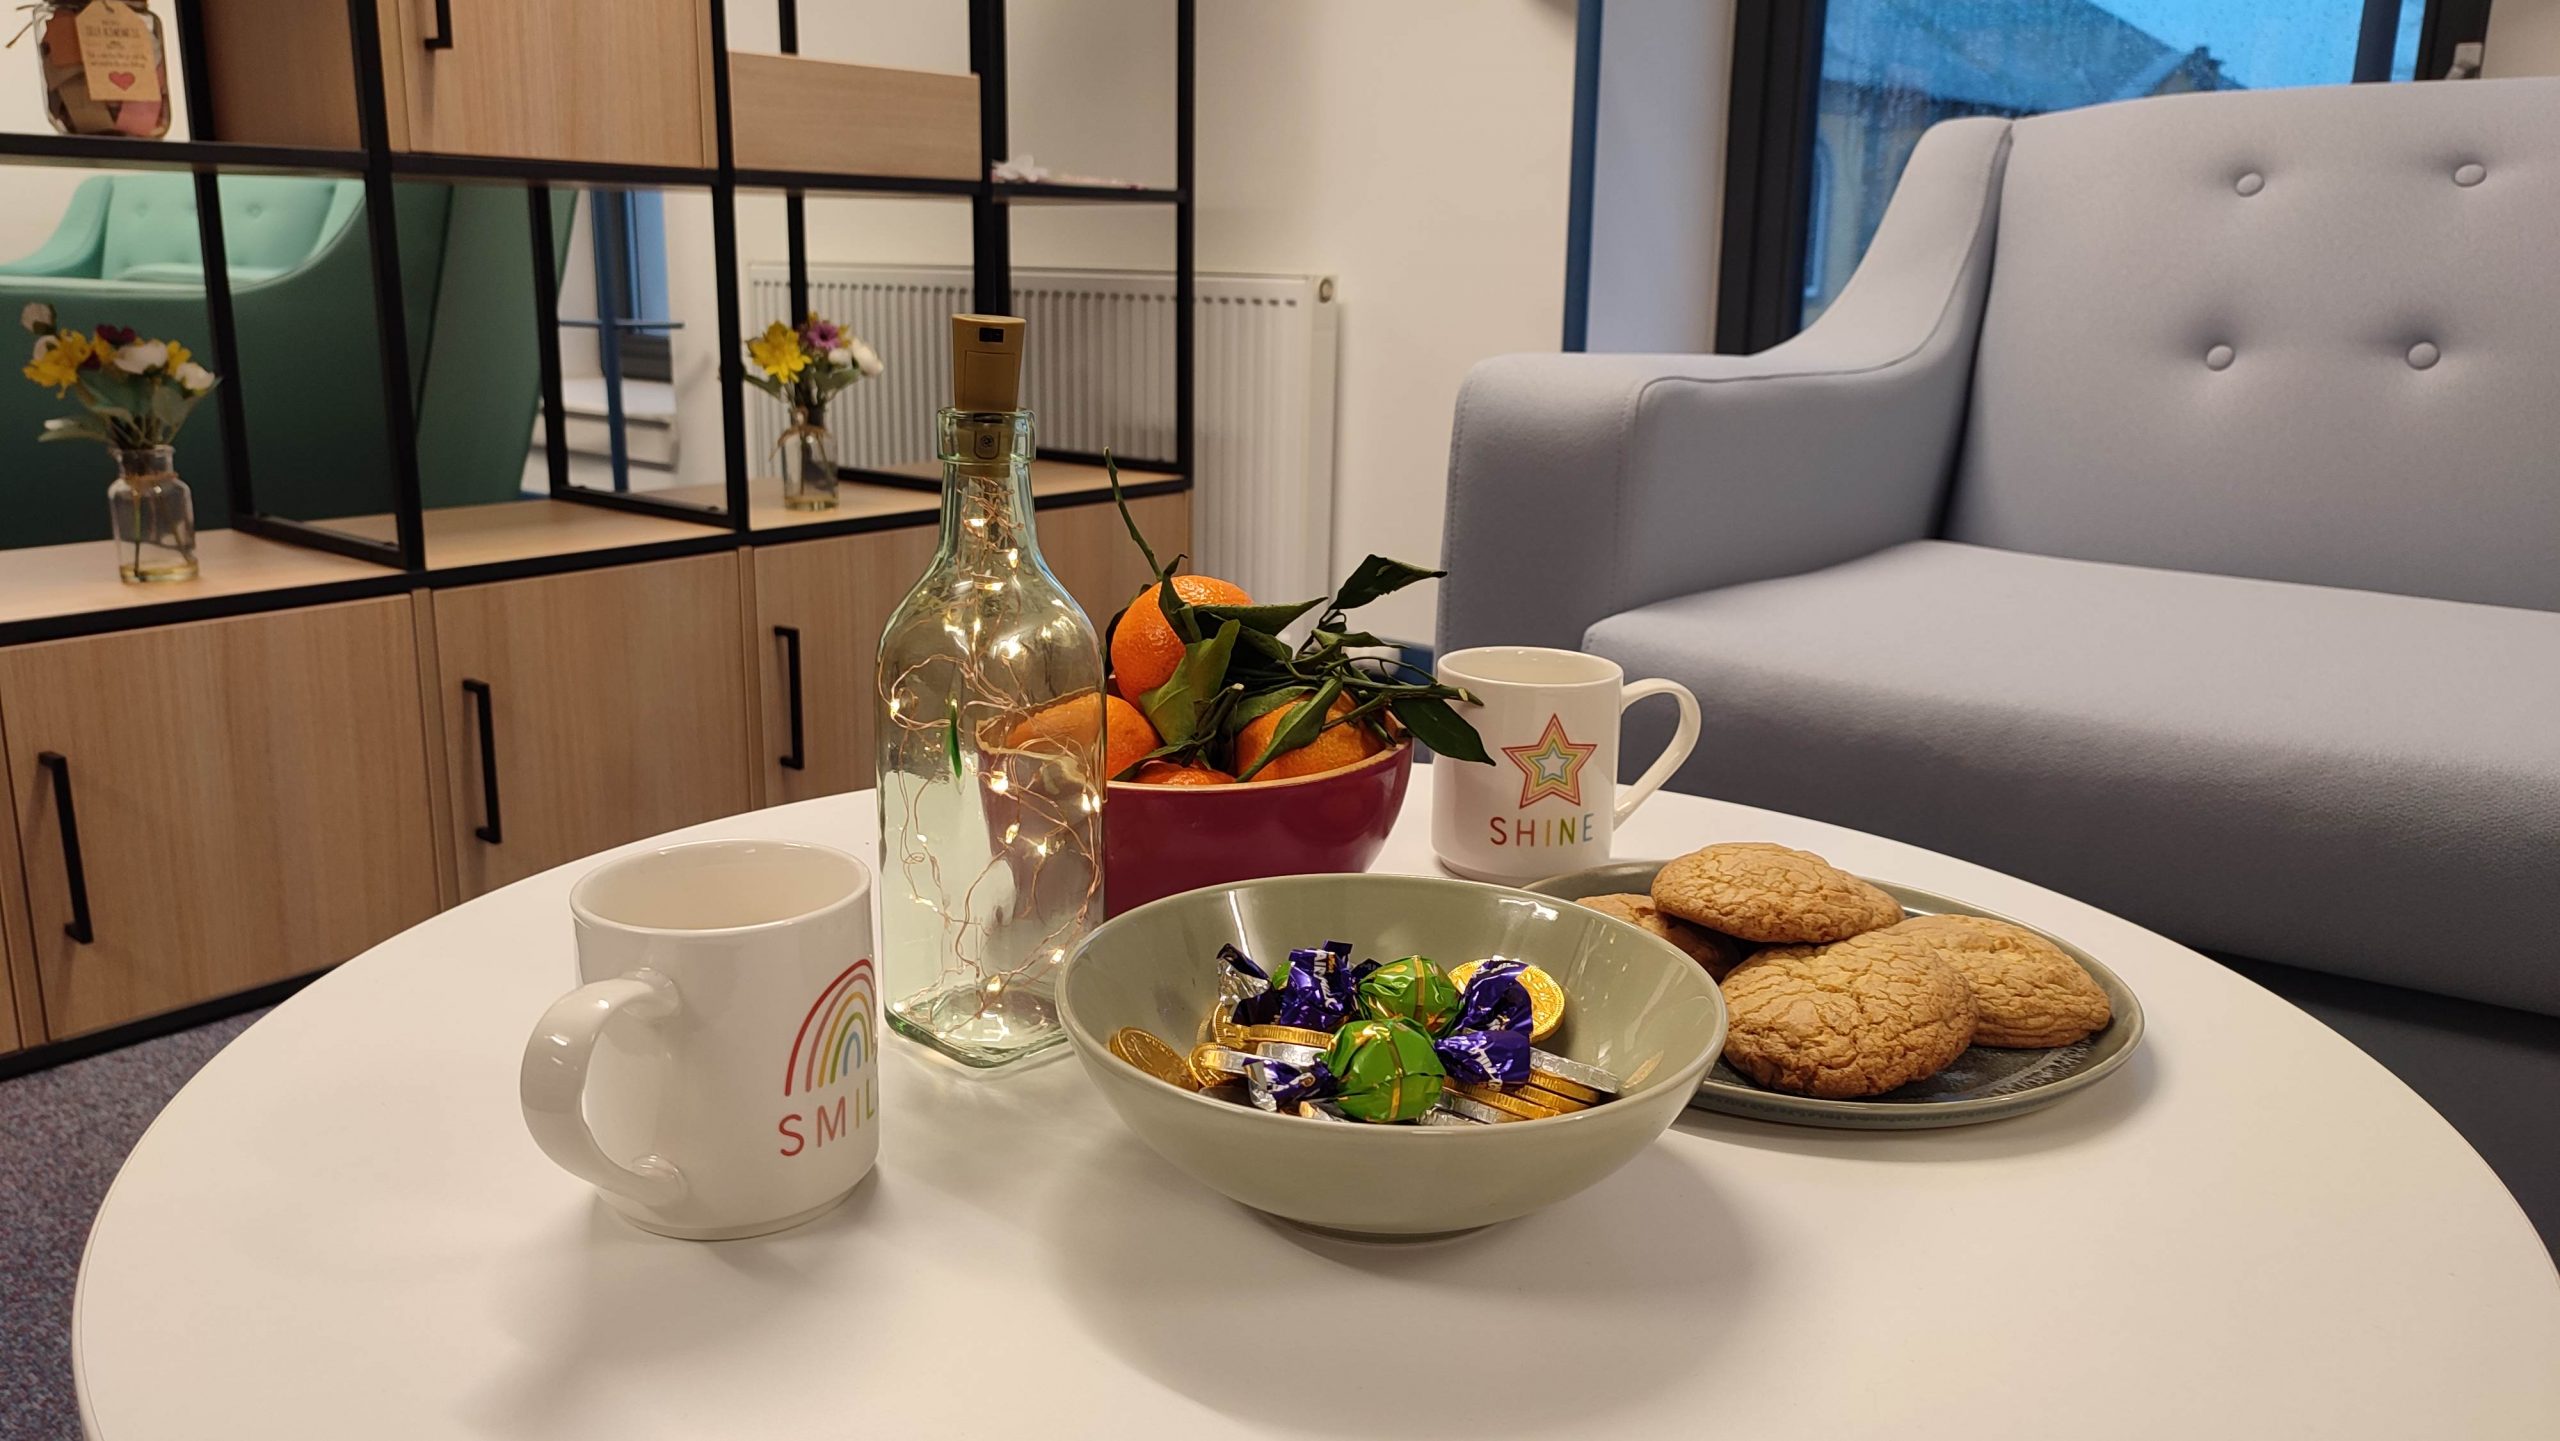 A sofa and coffee table in the wellbeing area, which has a cup of tea and a bowl of sweets